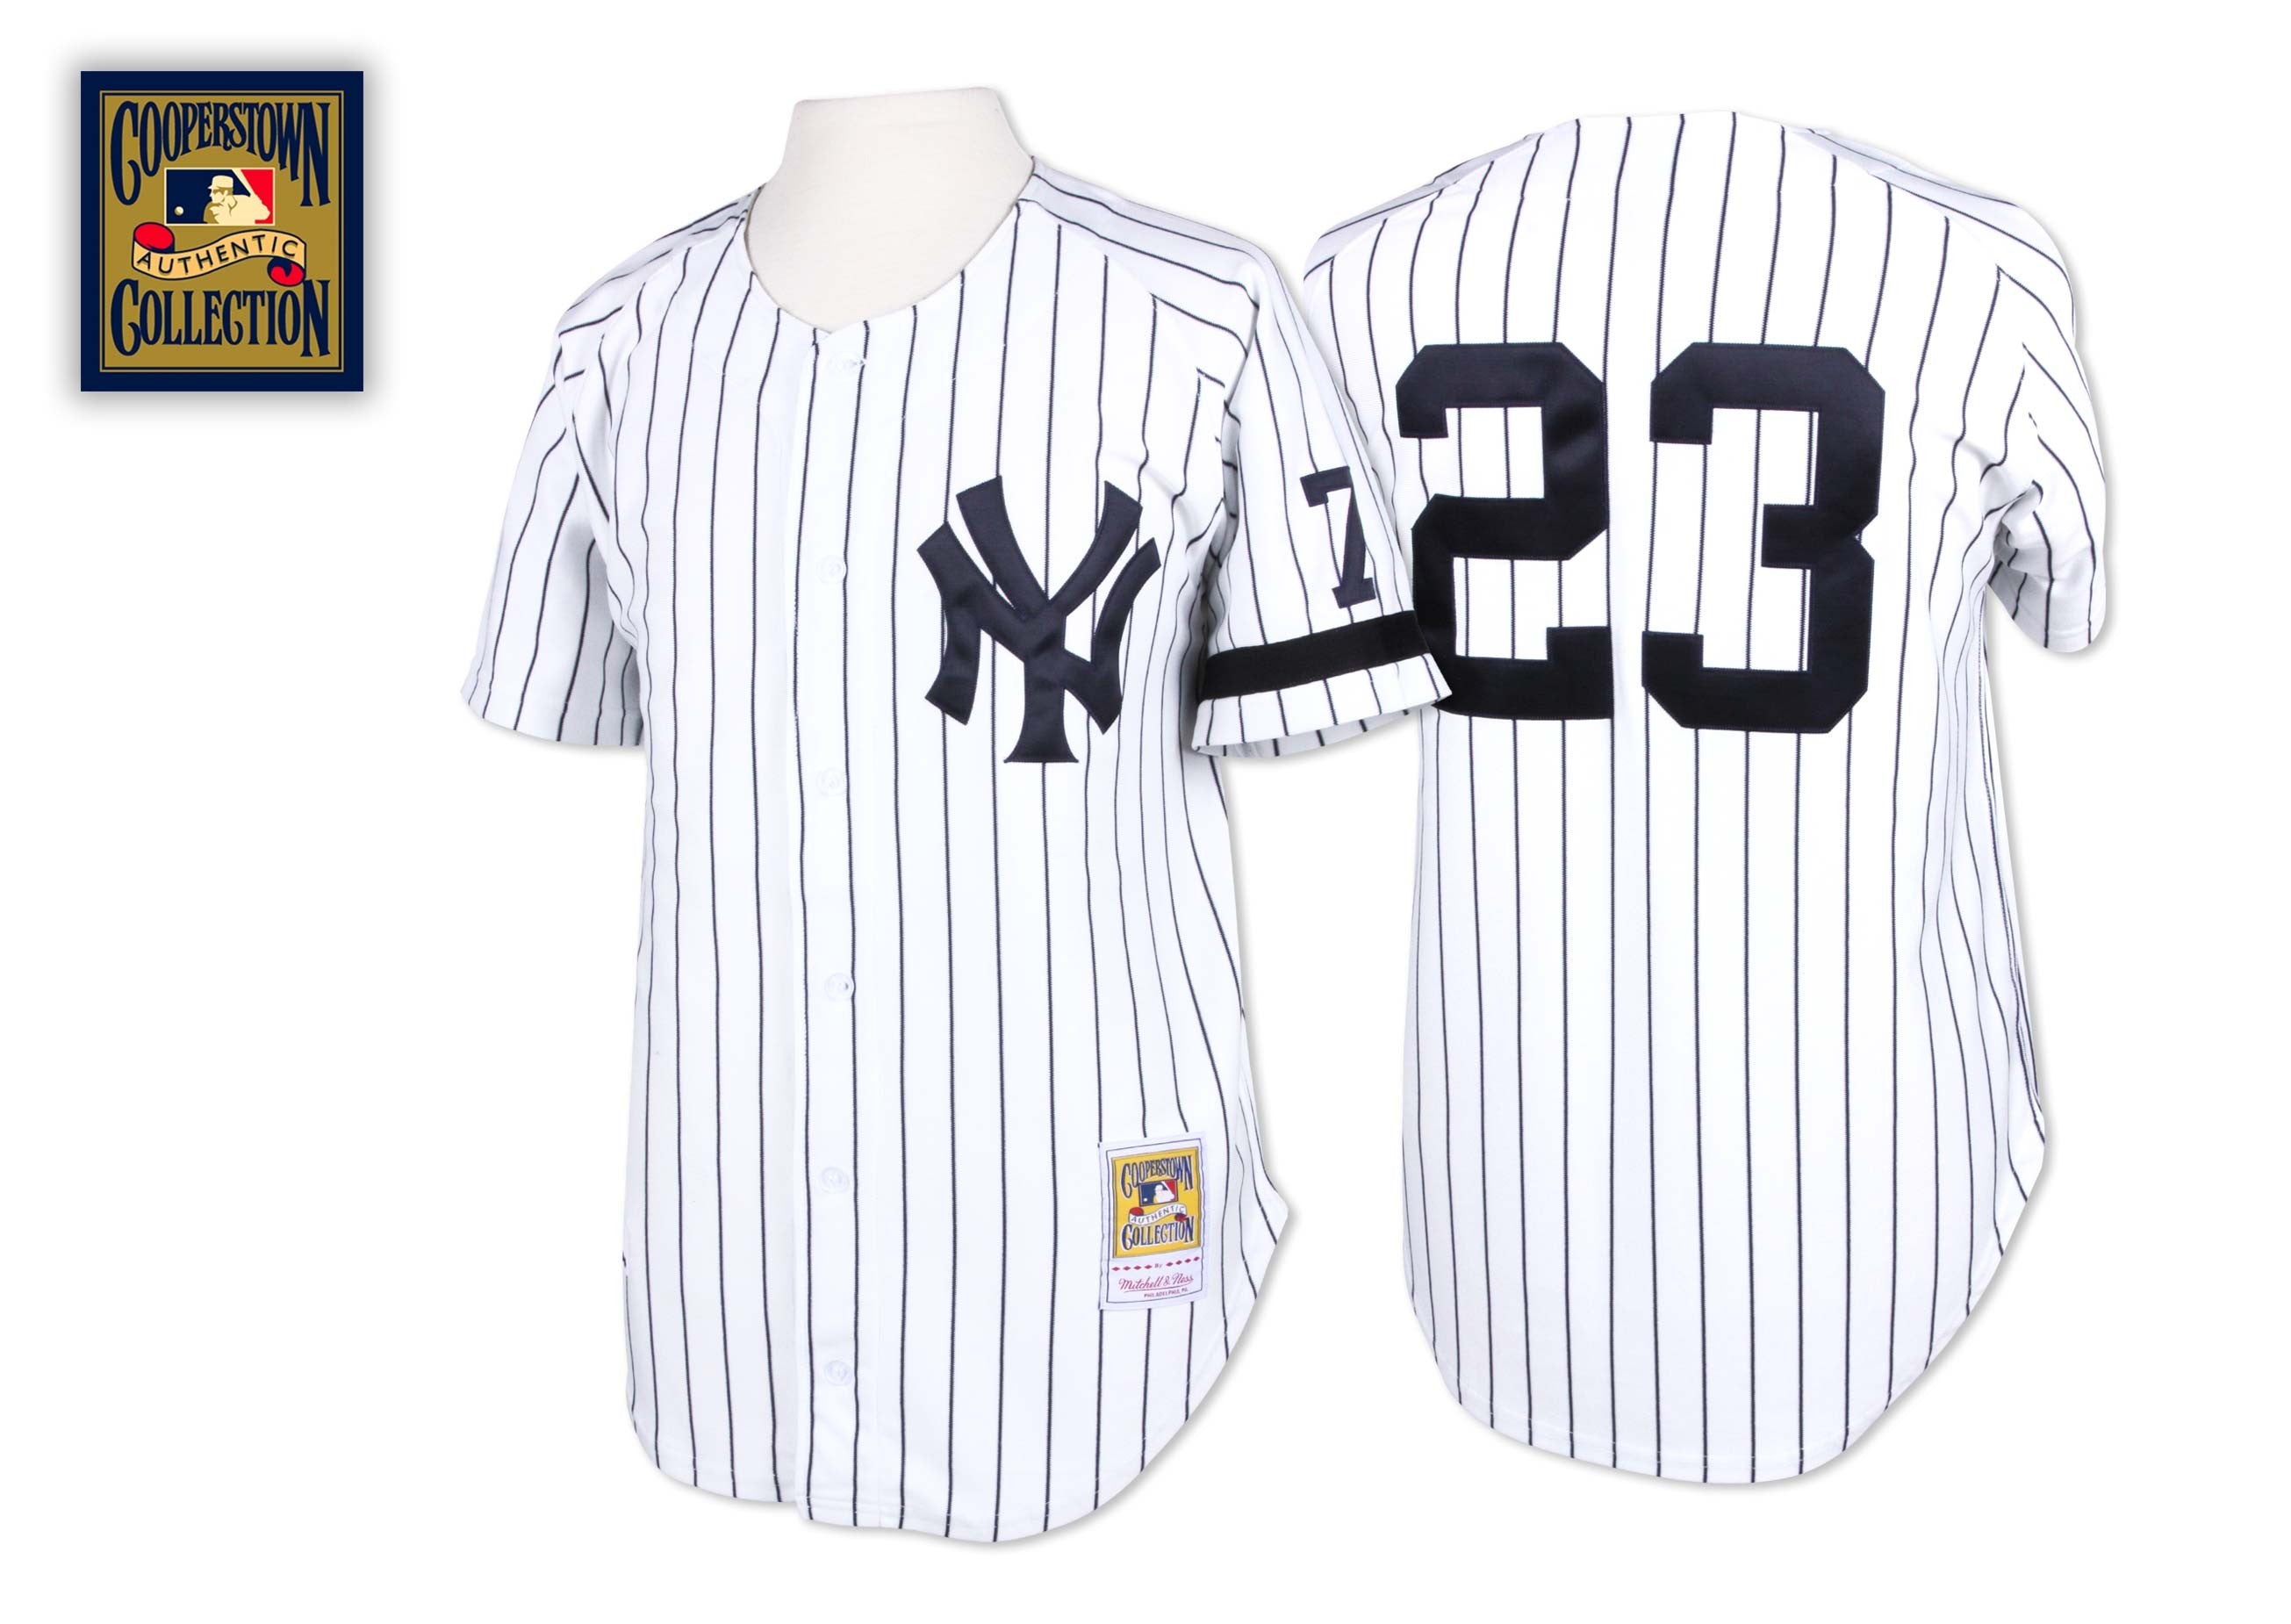 New York Yankees #23 Don Mattingly 1995 Mitchell and Ness Authentic Jersey